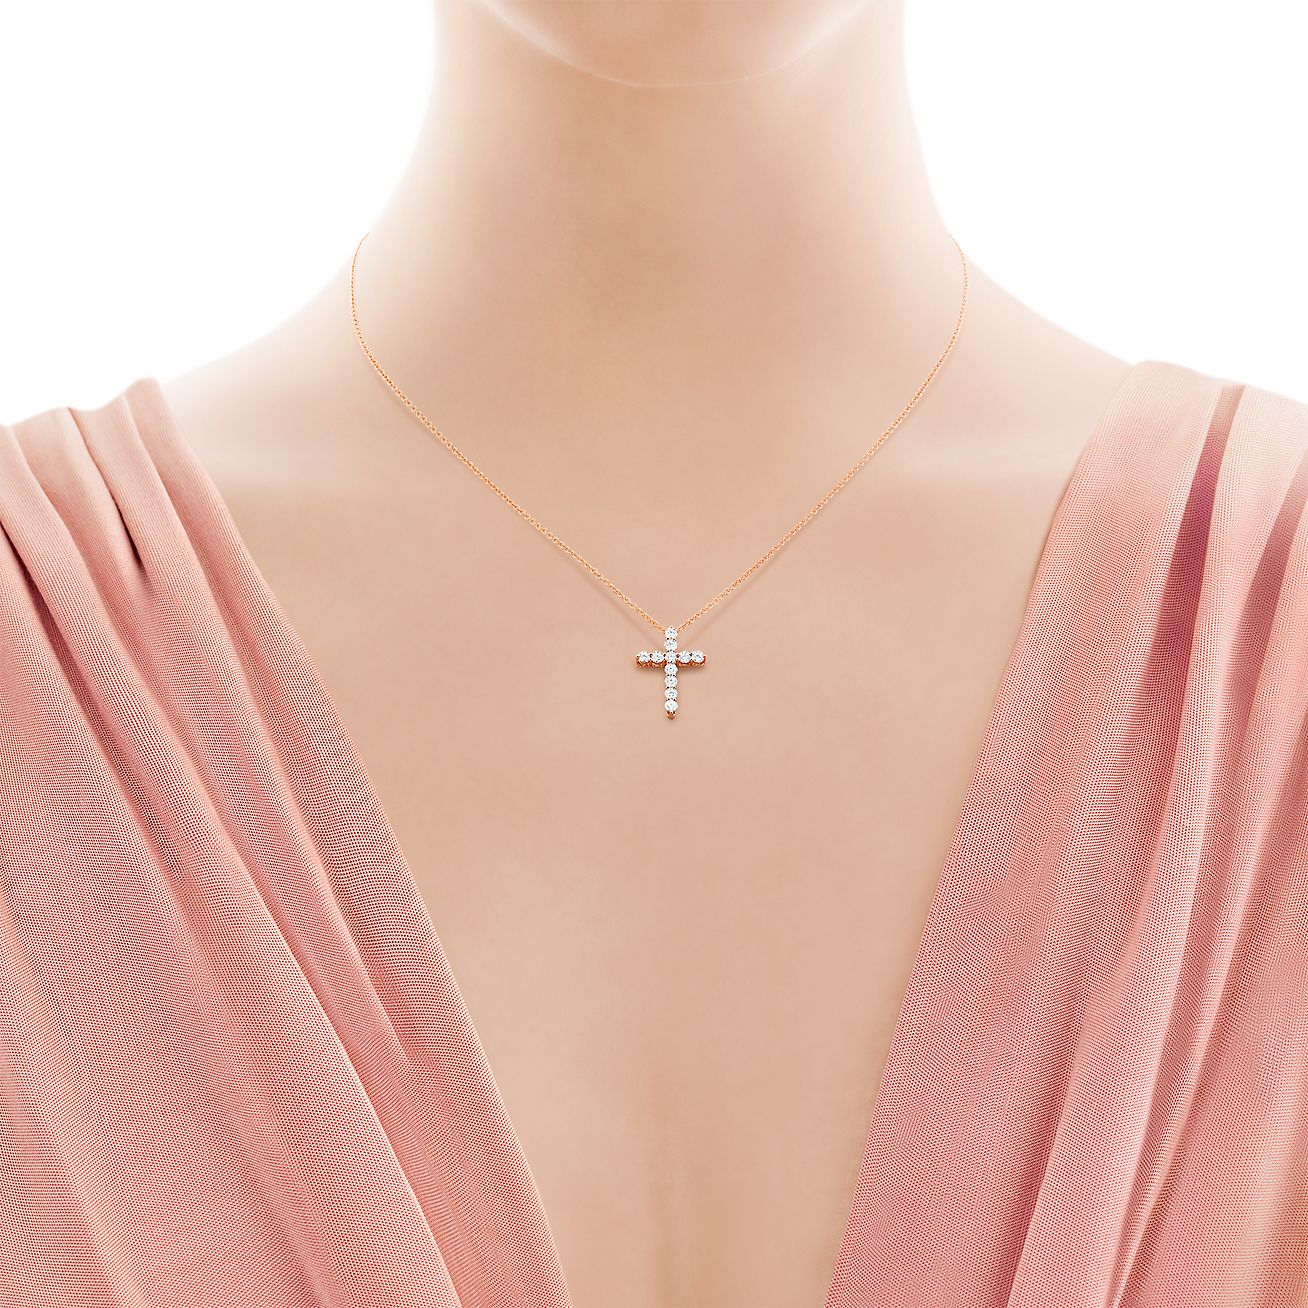 Cross pendant in 18k rose gold with 